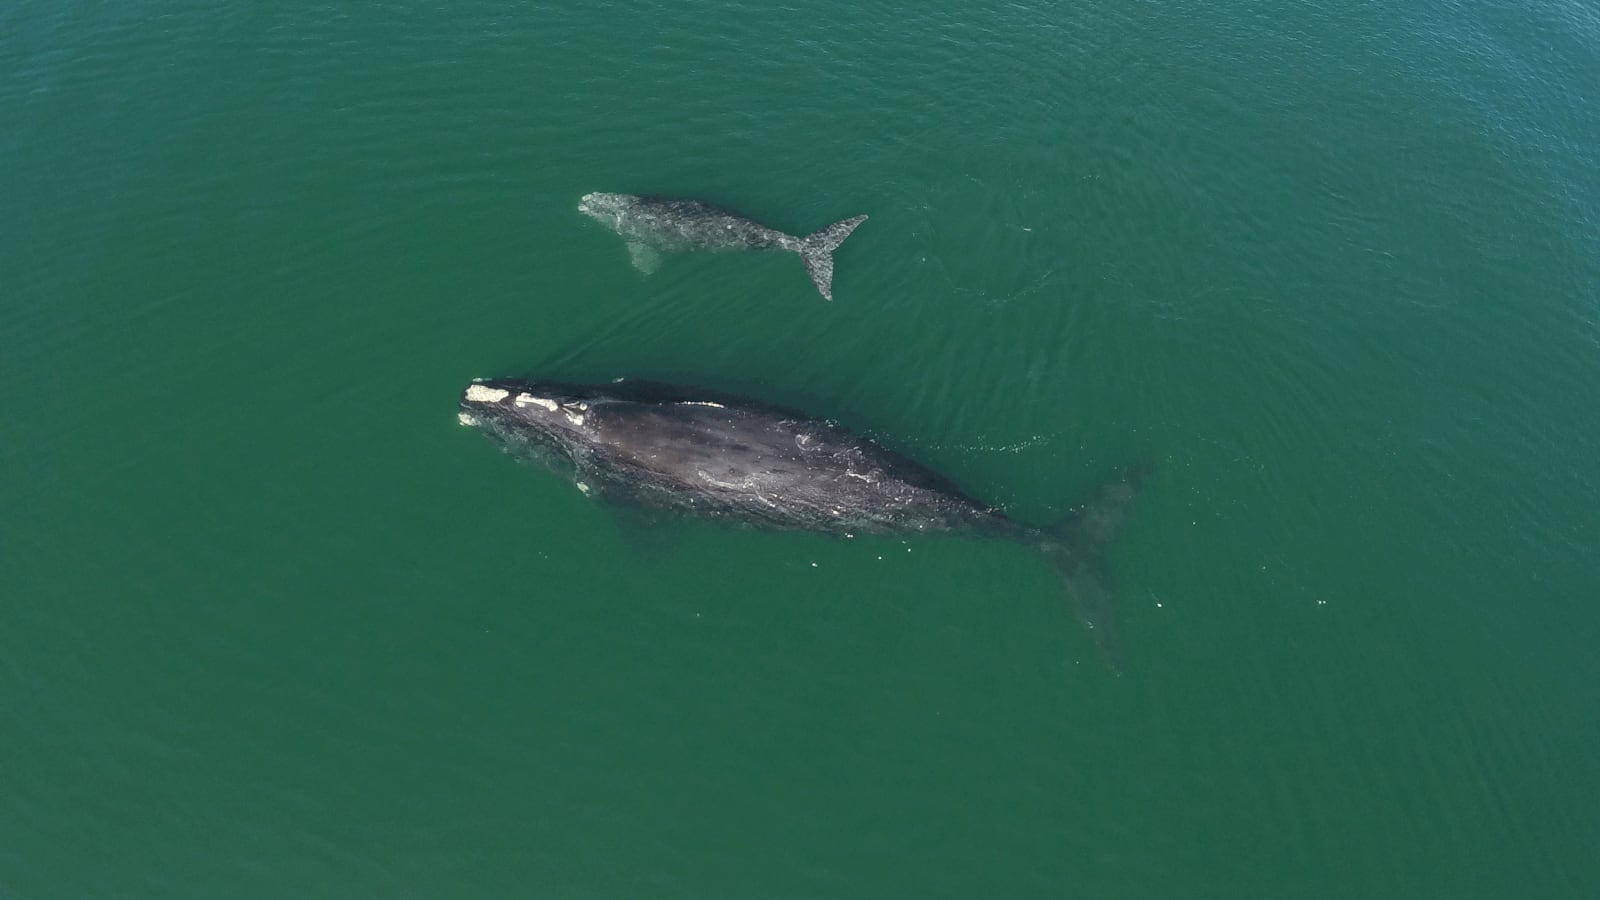 Lucky No. 13: Another right whale calf sighted this season